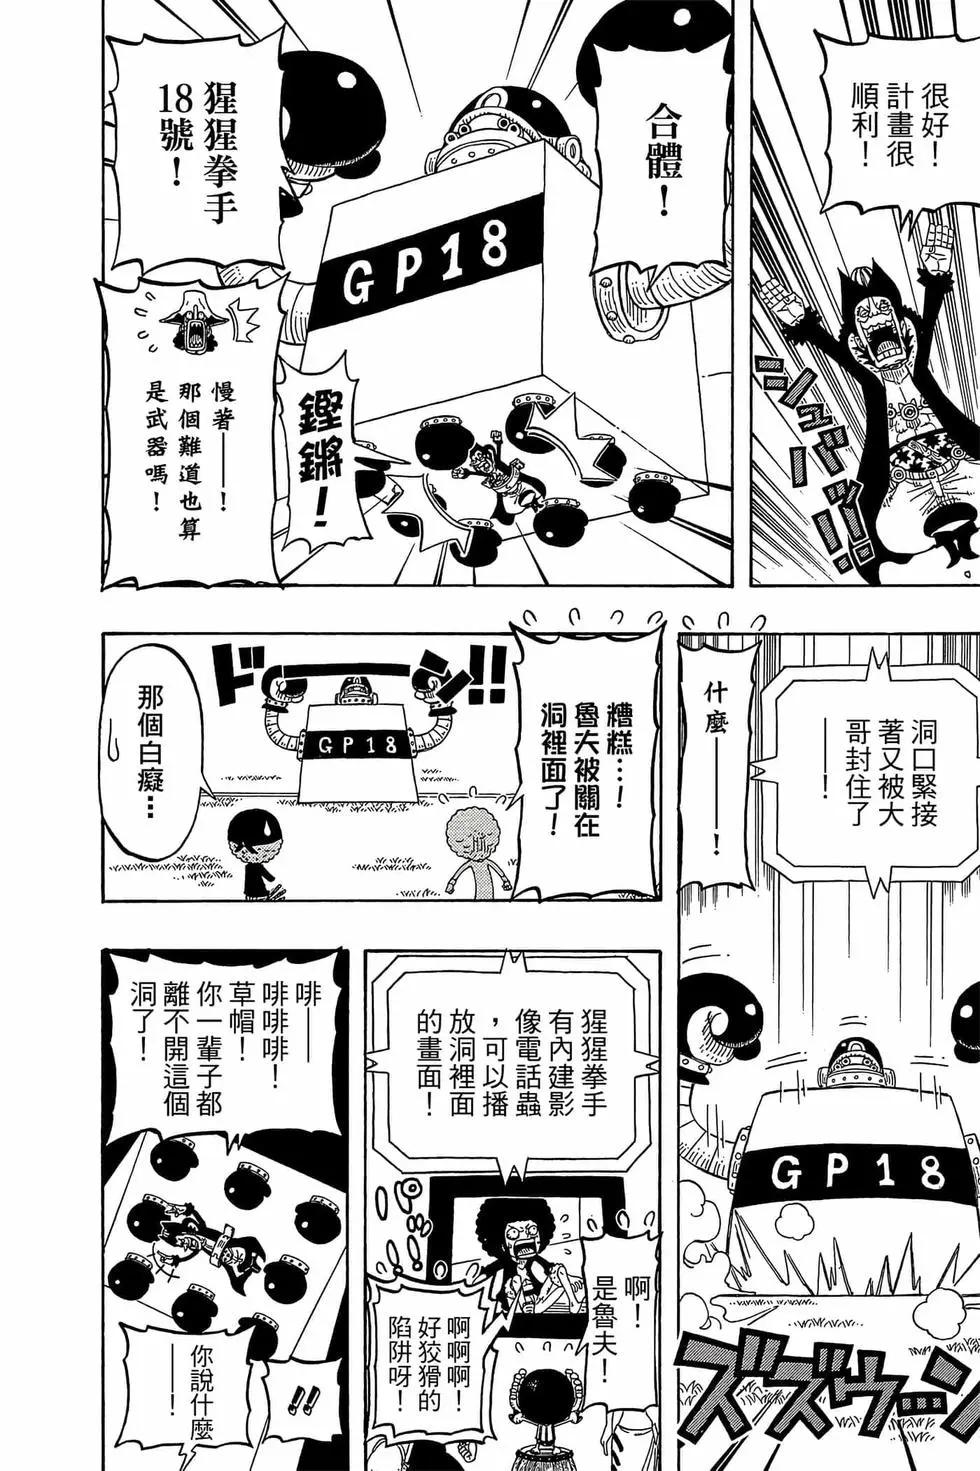 One piece party - 第02卷(1/4) - 7